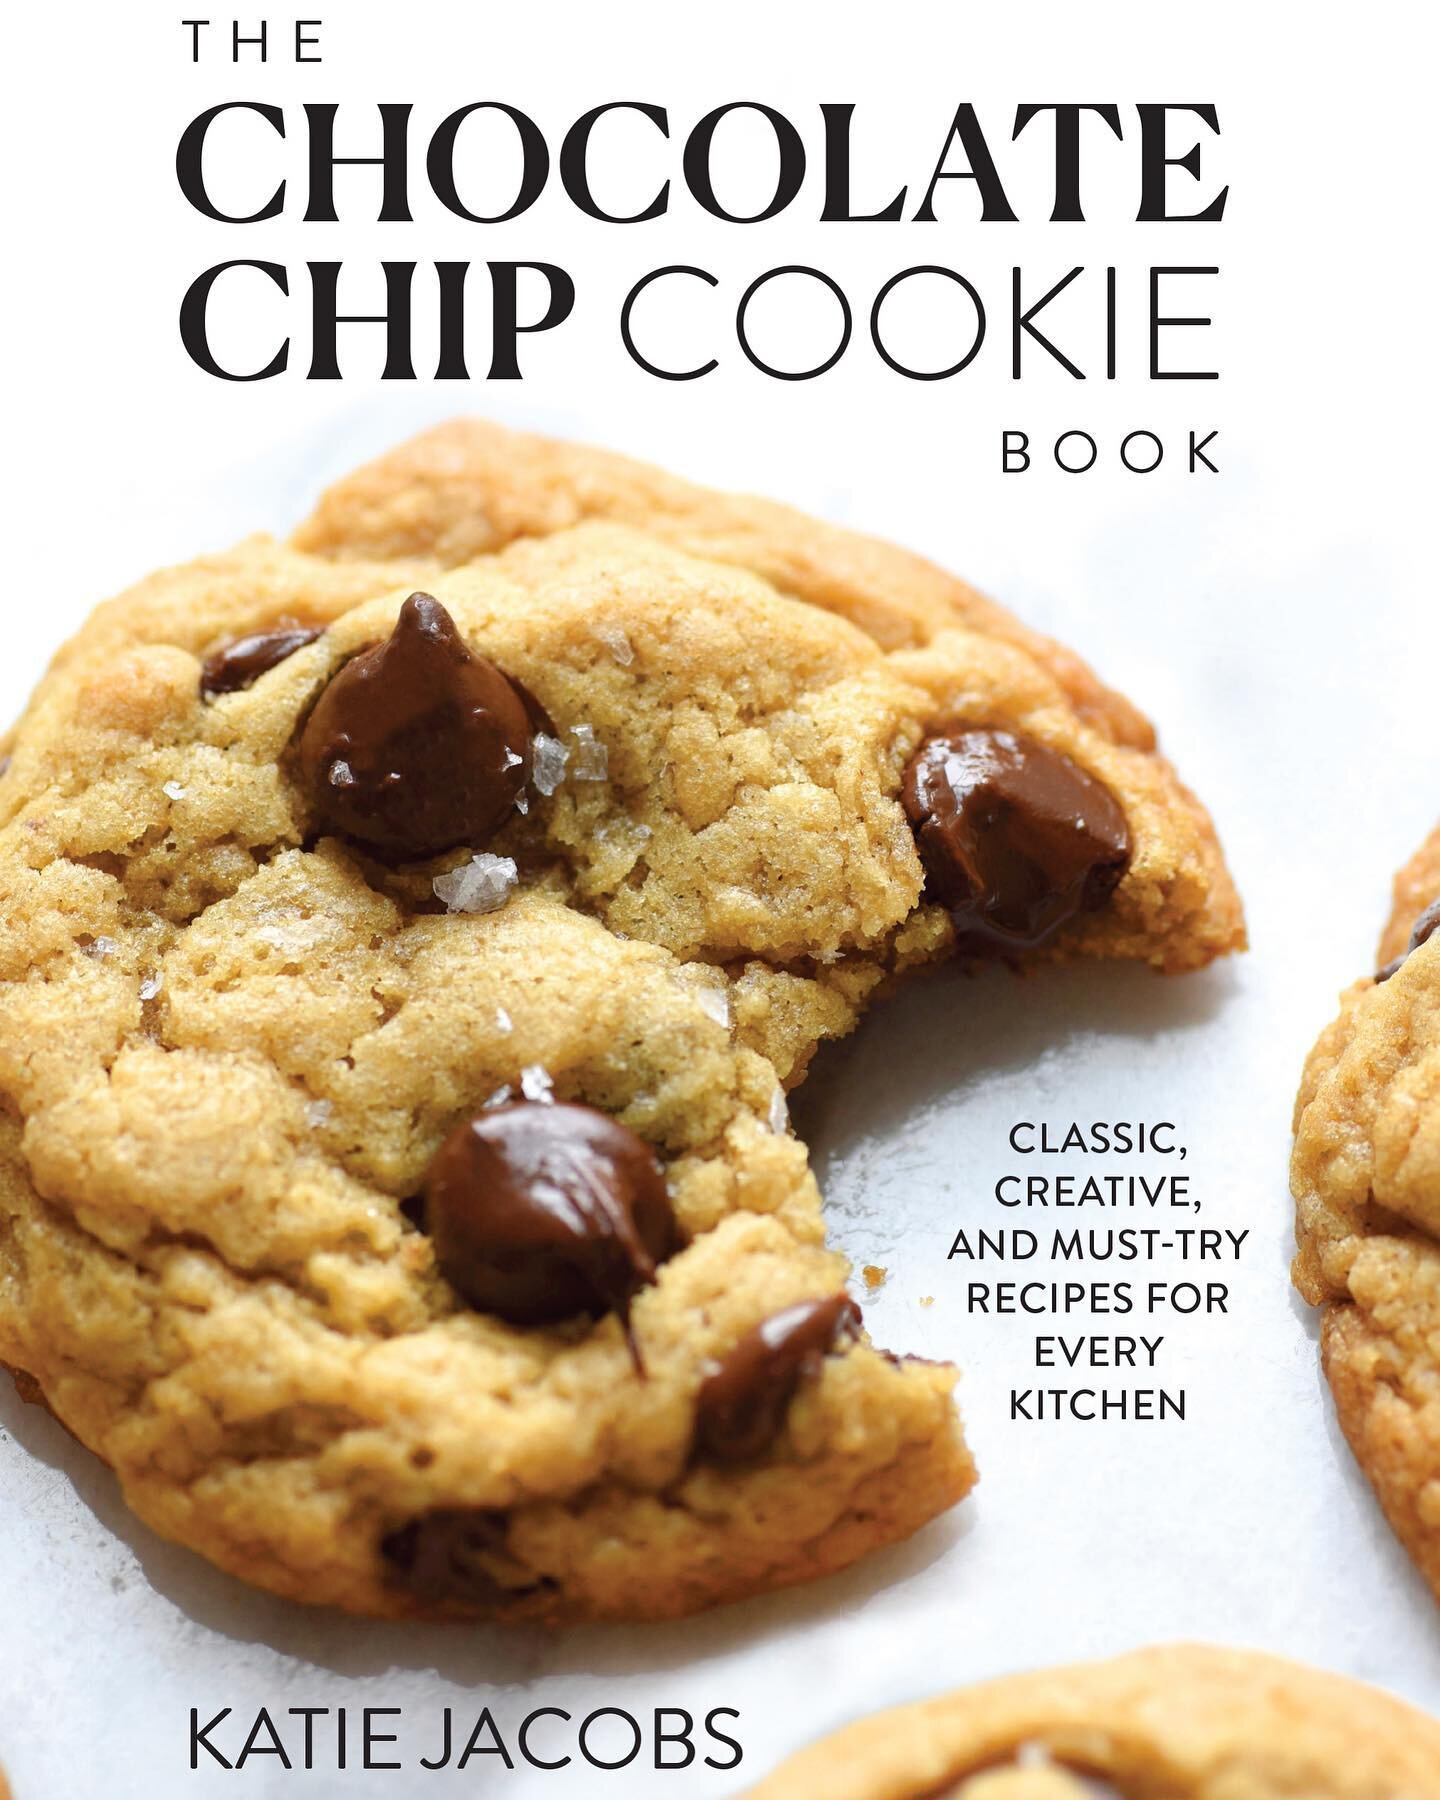 Pre-orders for my new book, The Chocolate Chip Cookie Book, are now open at @barnesandnoble.com. Use the promo code PREORDER25 for 25% off! 

#thechocolatechipcookiebook #stylingmyeveryday #preorder #book #bookpreorder #barnesandnoble